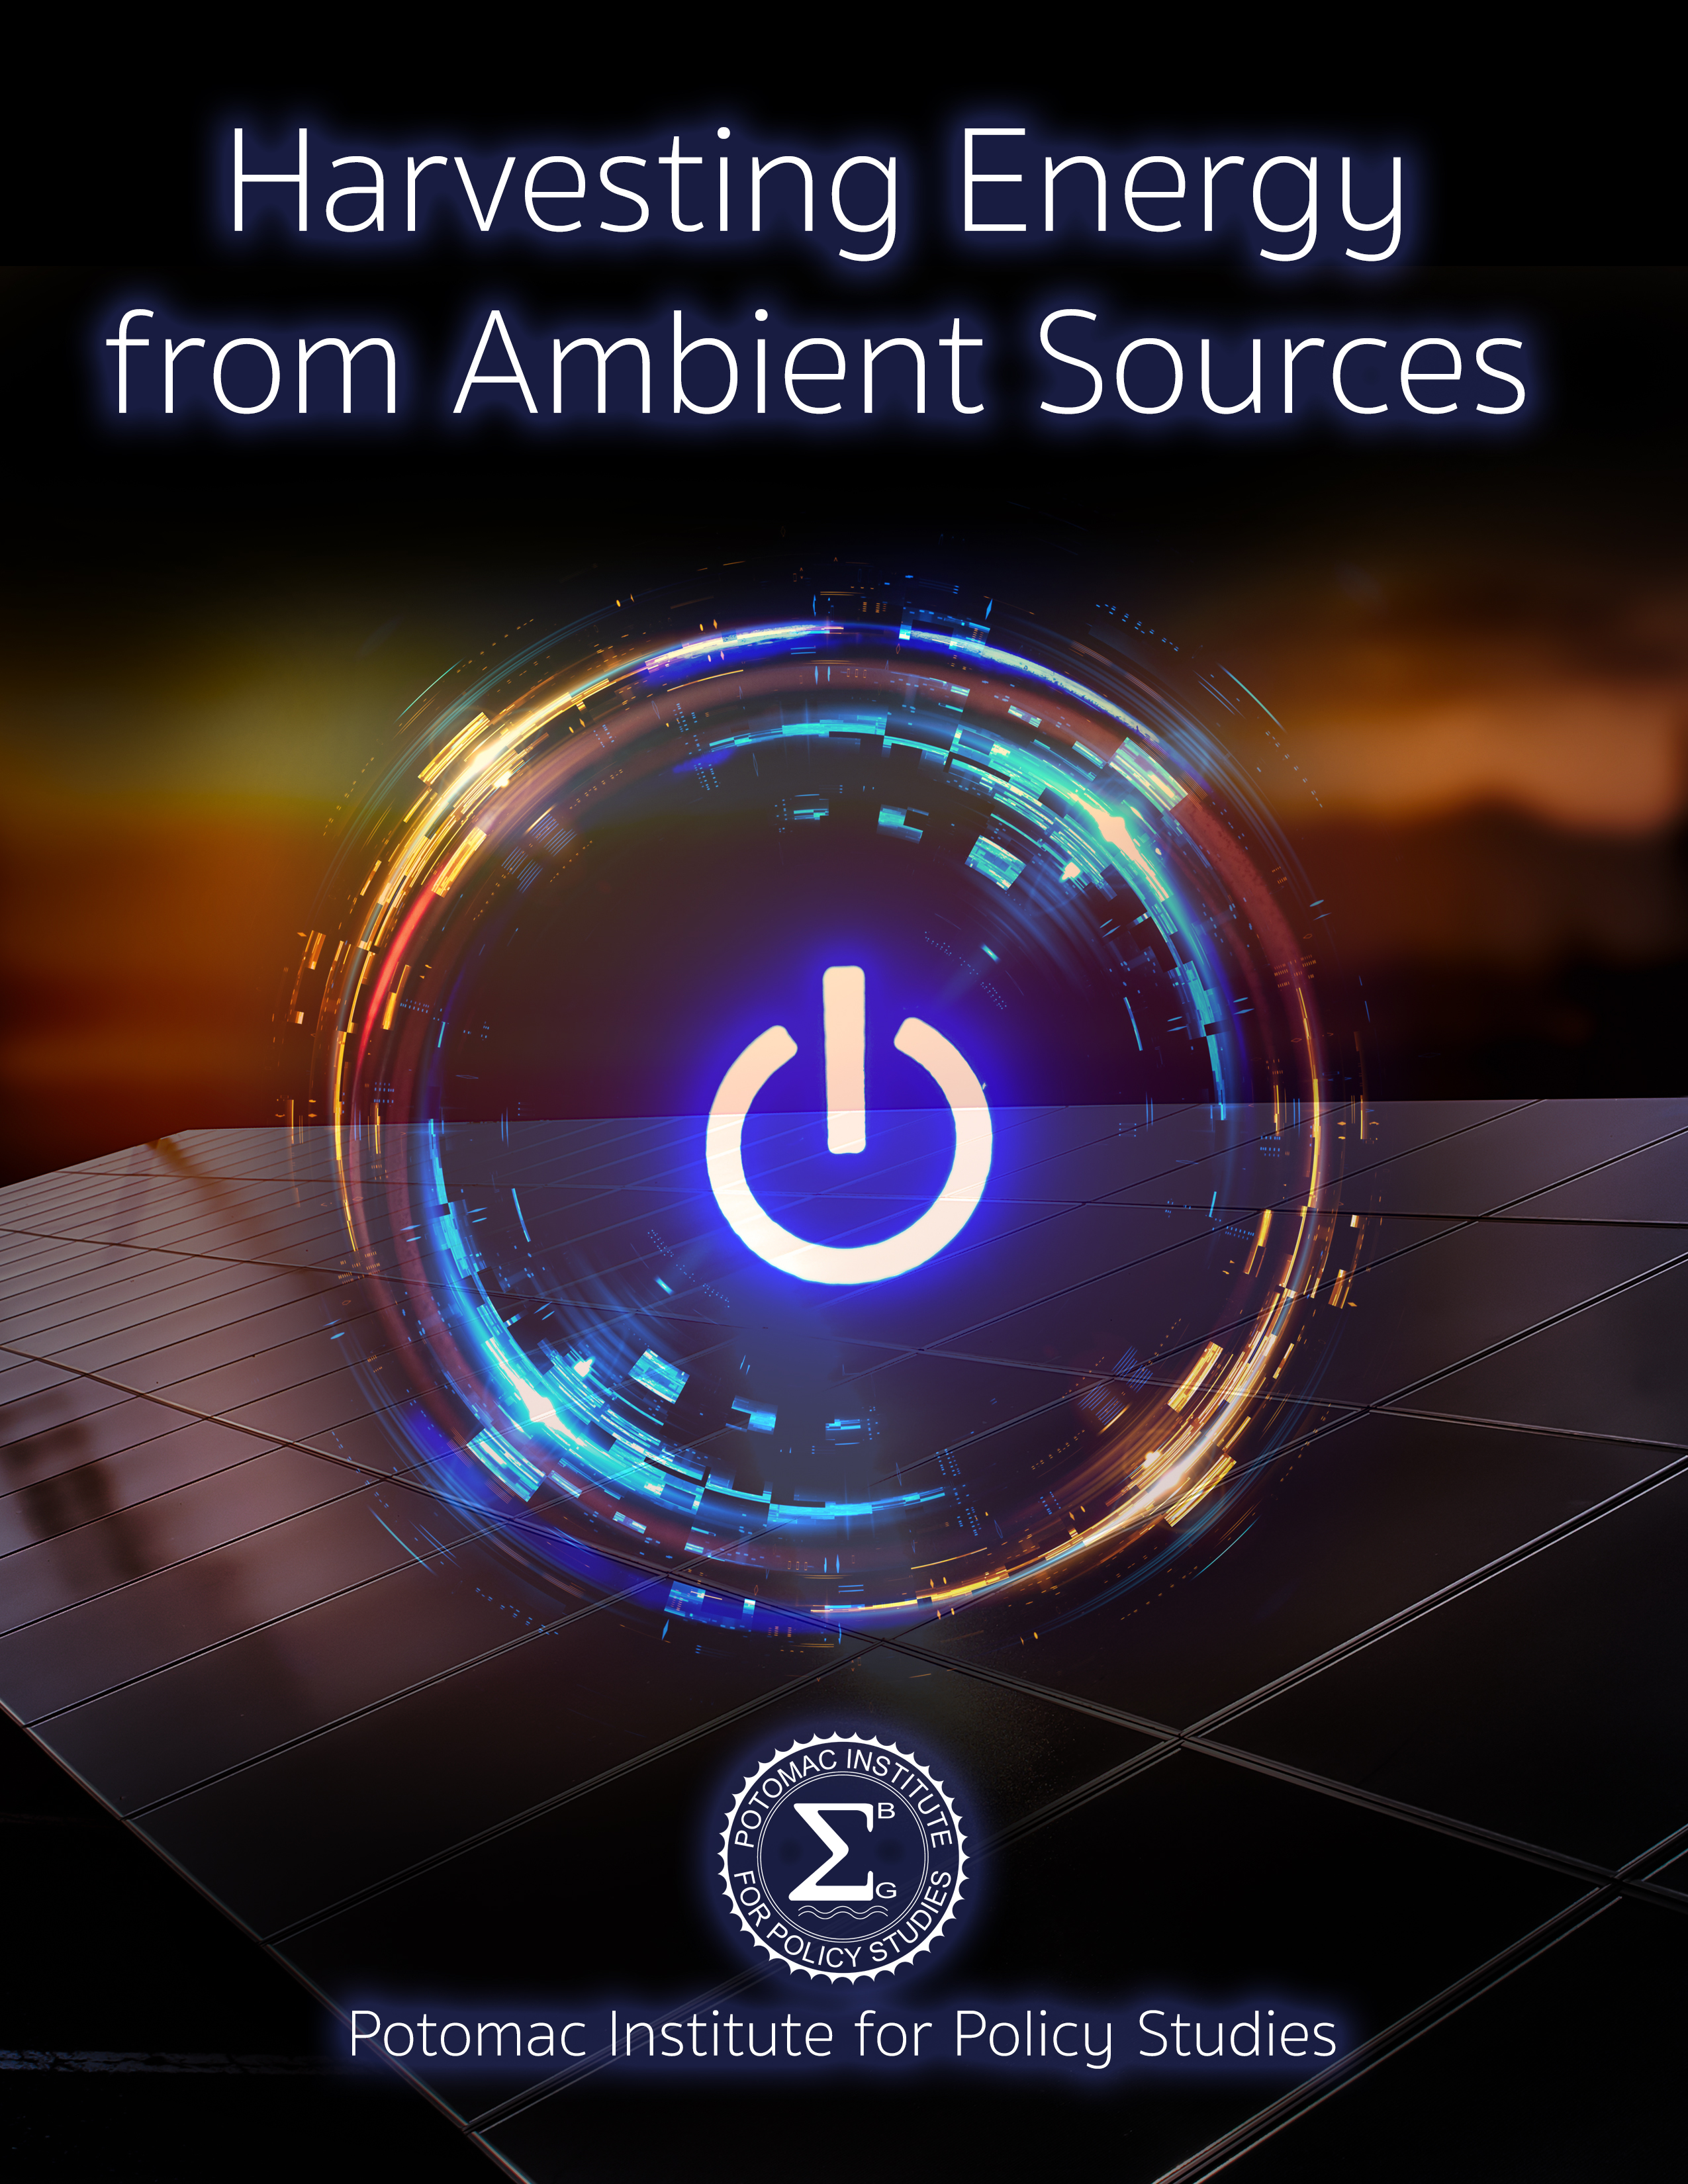 Harvesting Energy from Ambient Sources